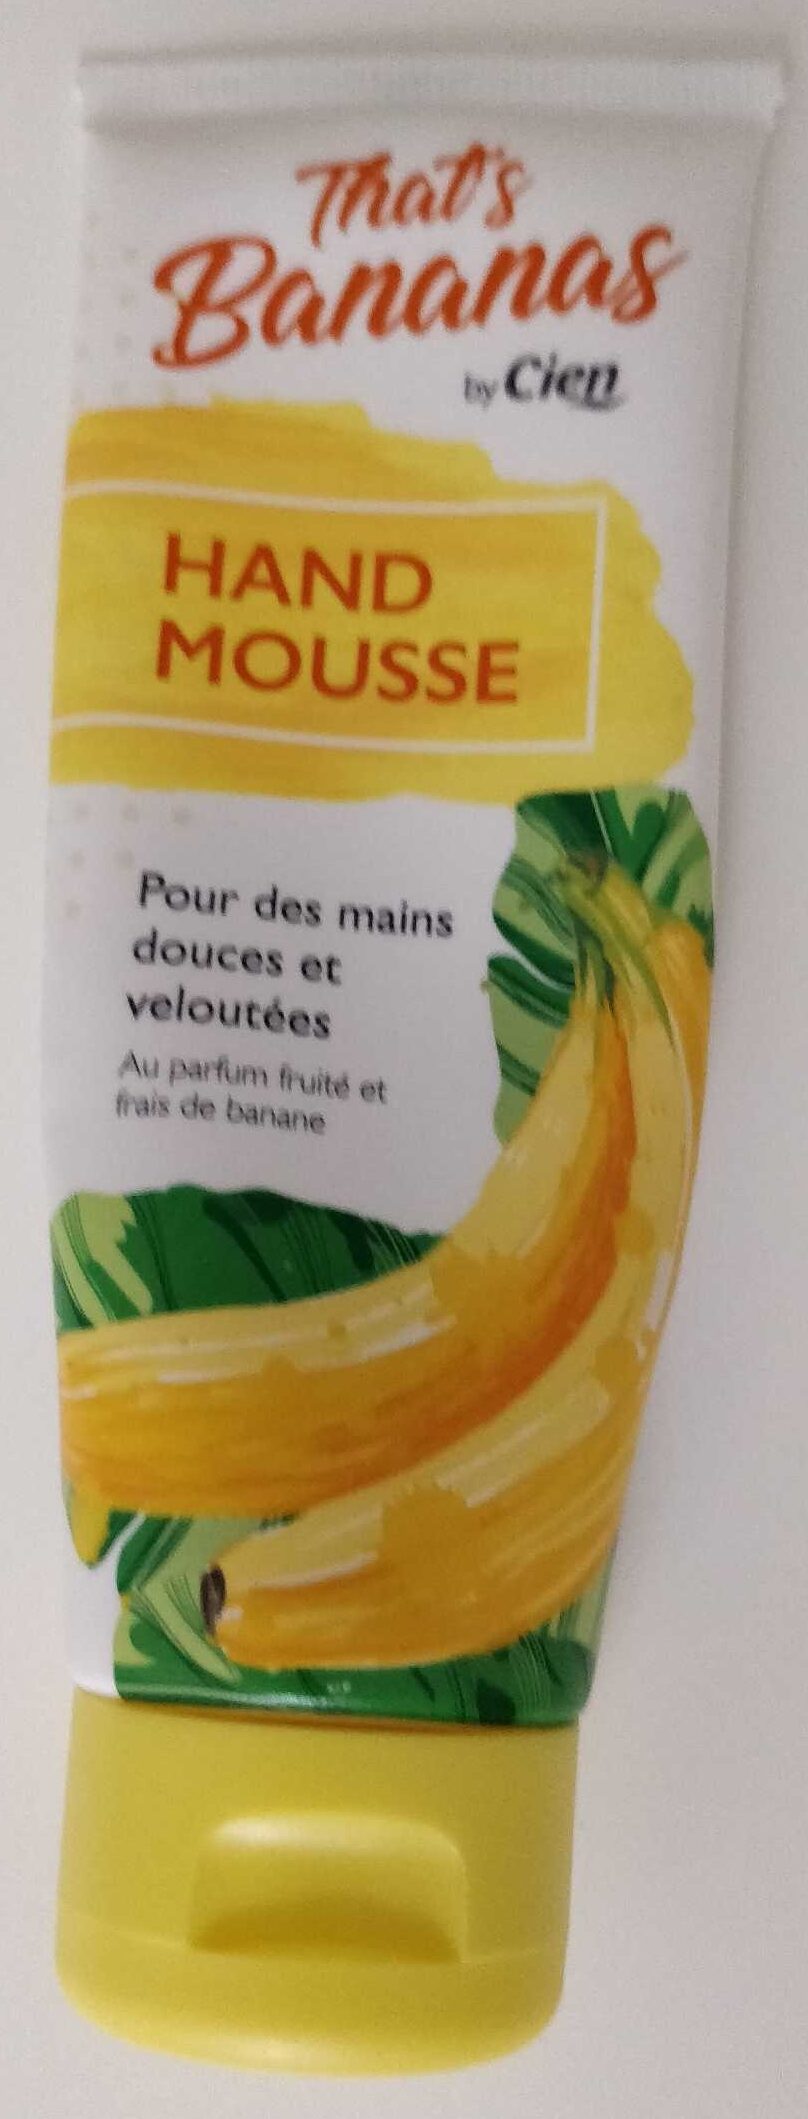 That's Bananas Hand Mousse - Product - en